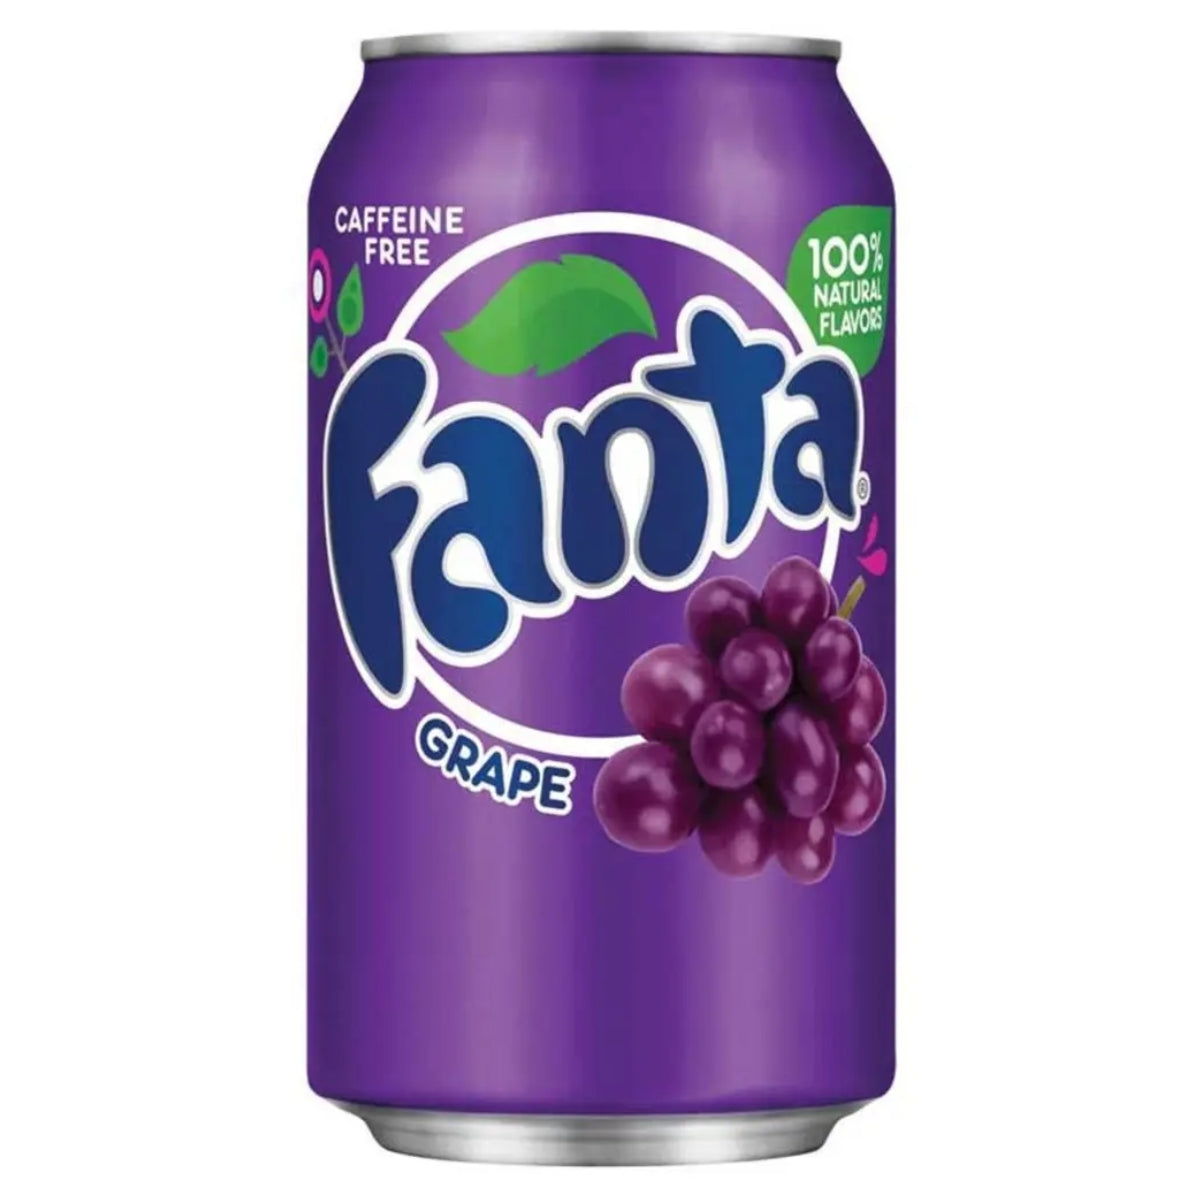 A can of Fanta - Grape - 330ml on a white background.